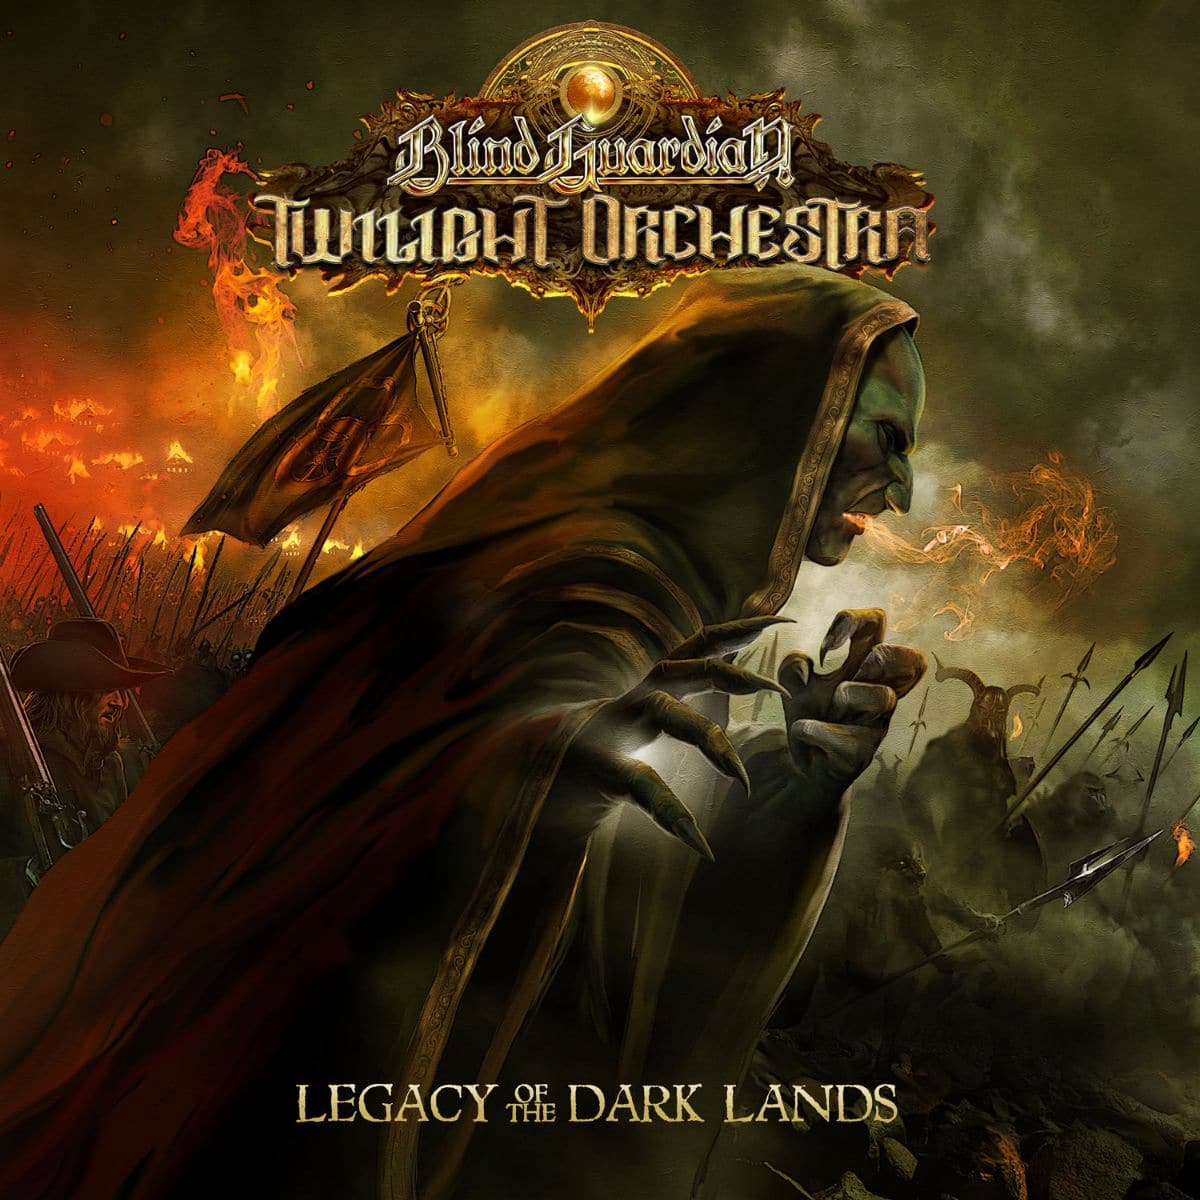 blind-guardian-twilight-orchestra-legacy-dark-lands-cover